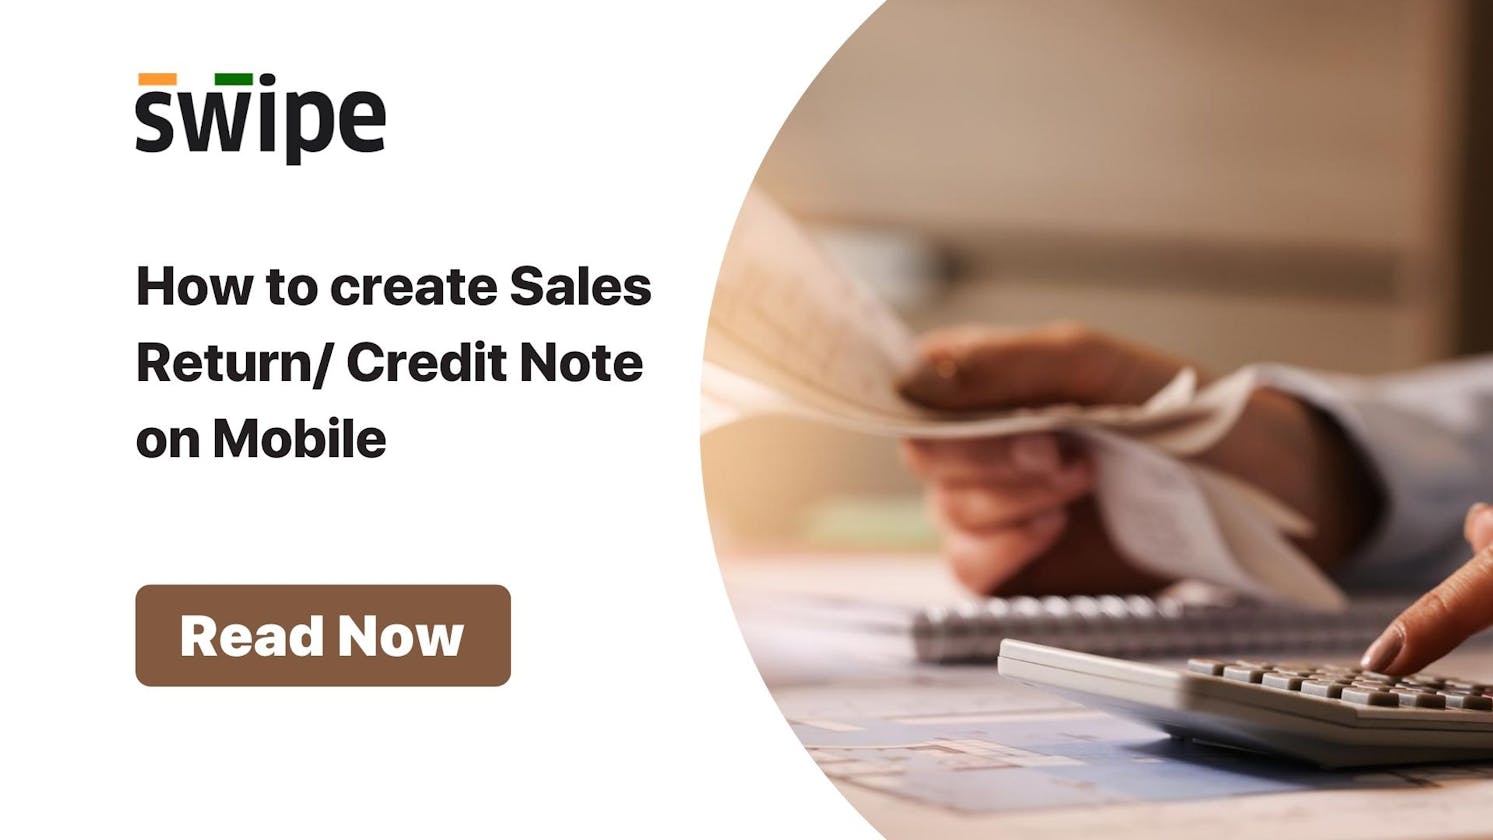 How to create Sales Return/ Credit Notes on Mobile